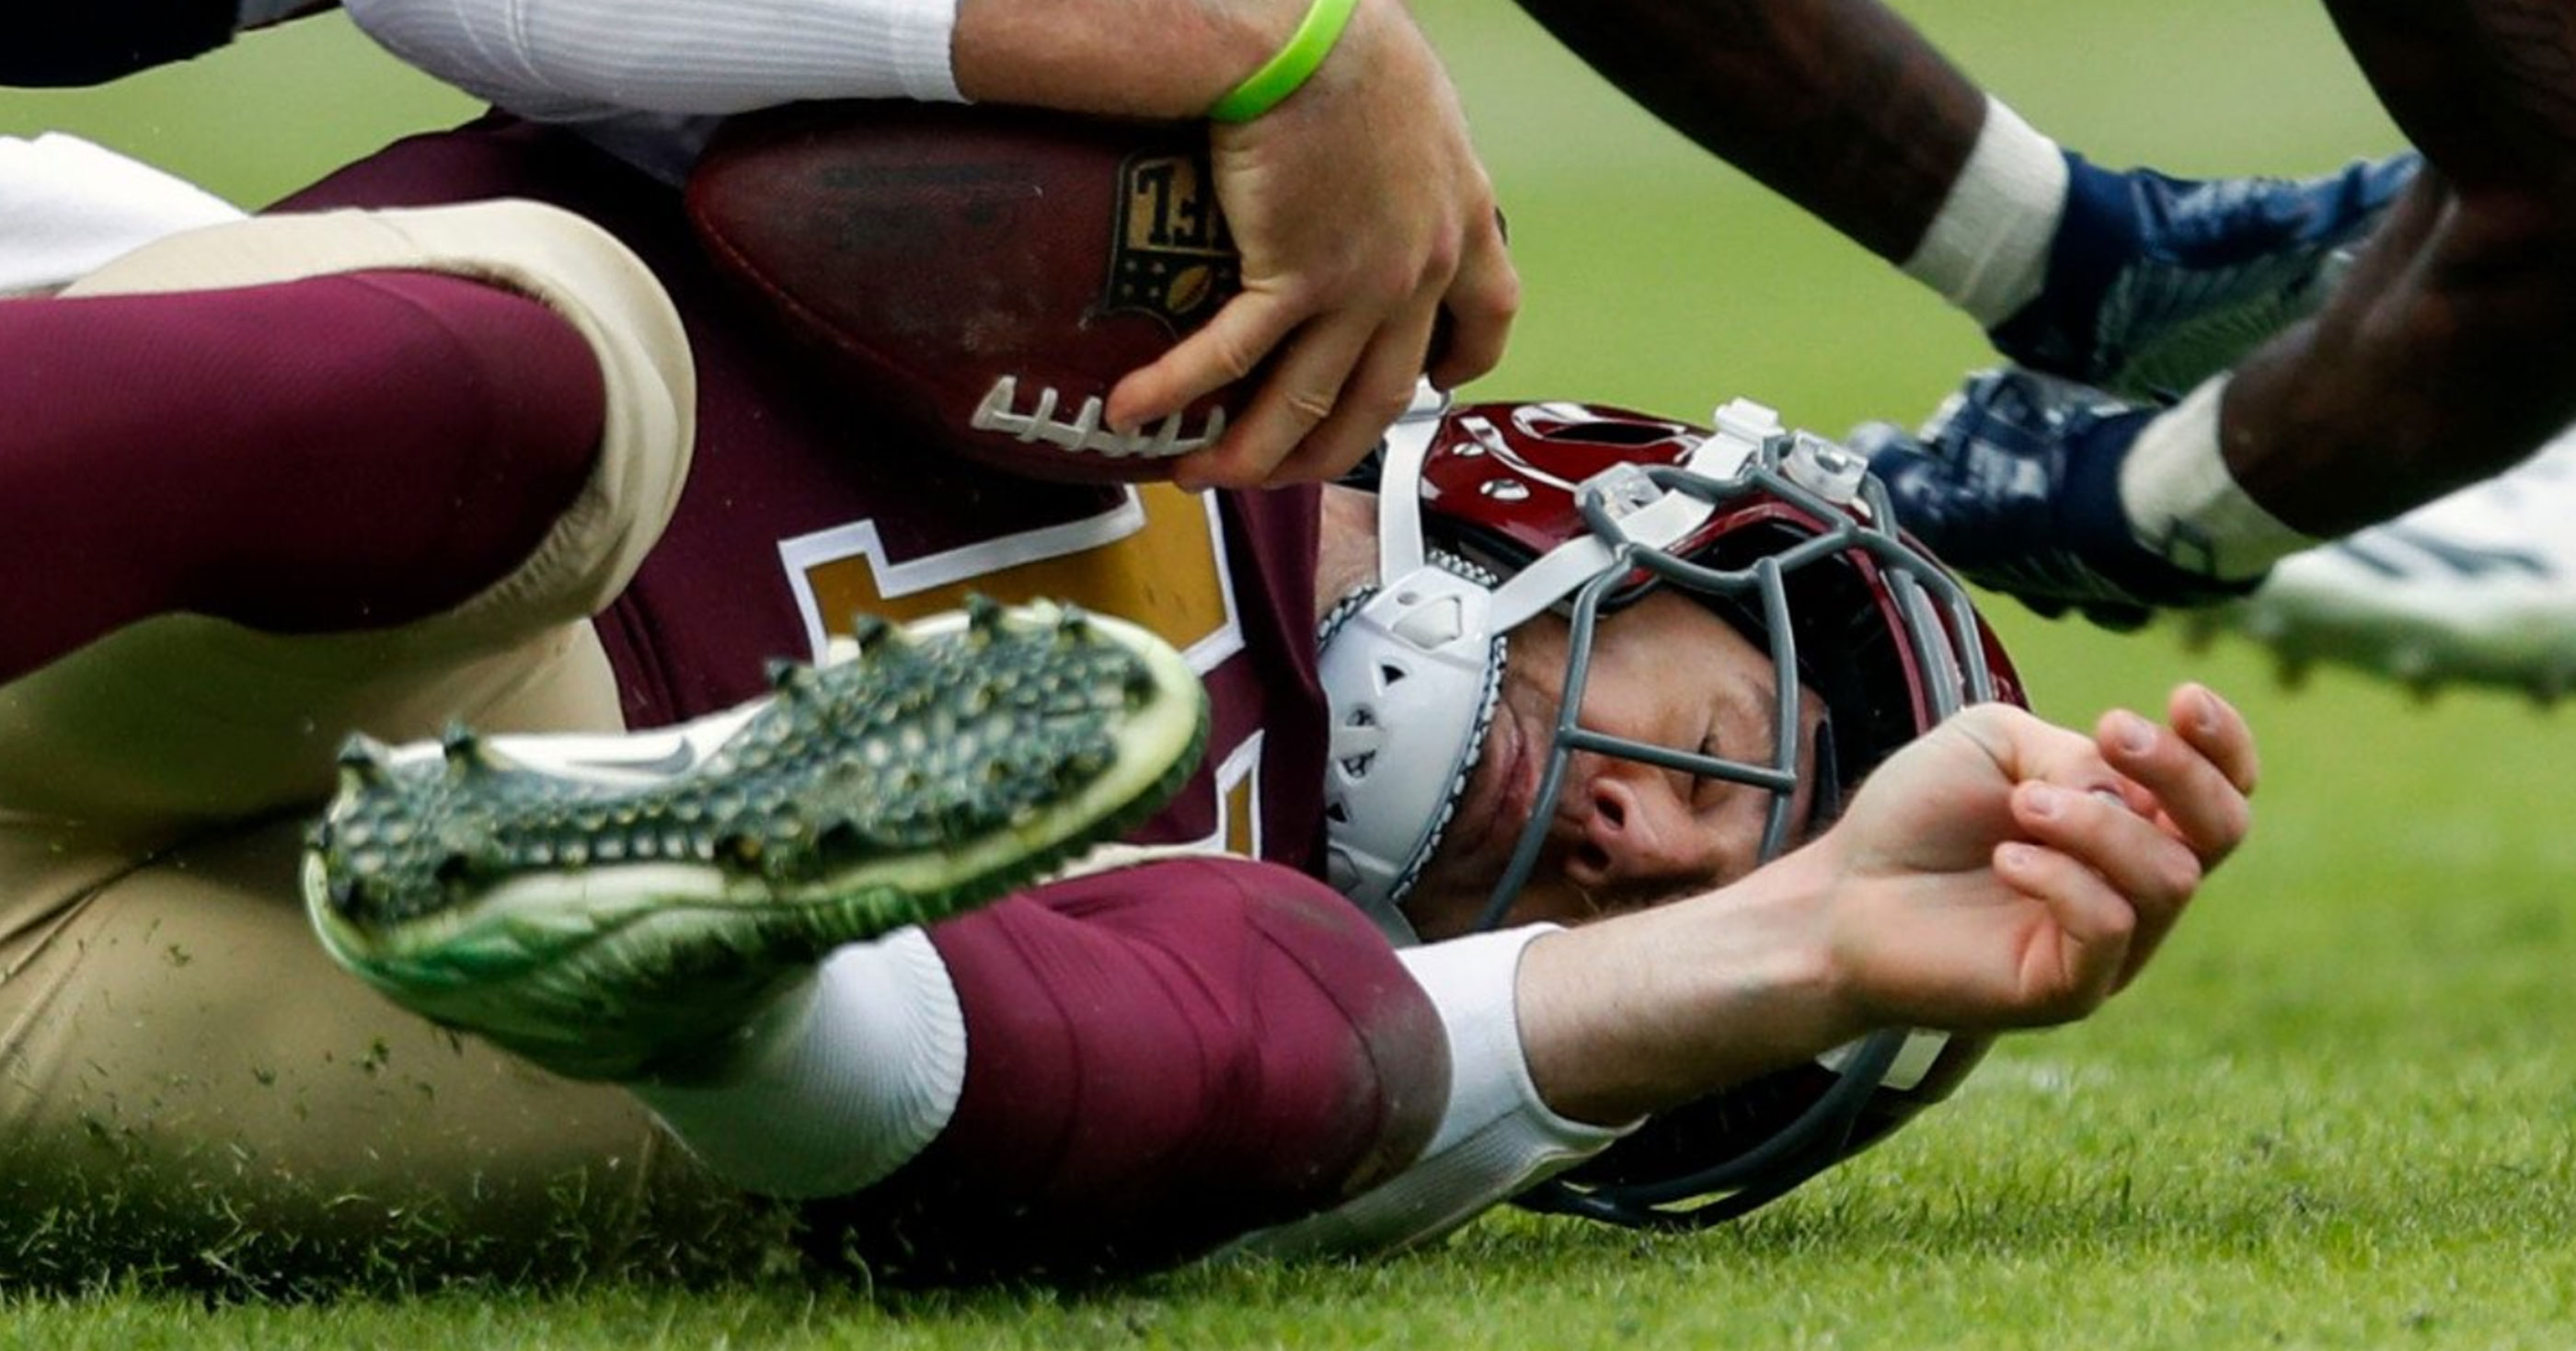 Gruesome Photo Of Alex Smith's Injury Shows Exact Moment When His Leg